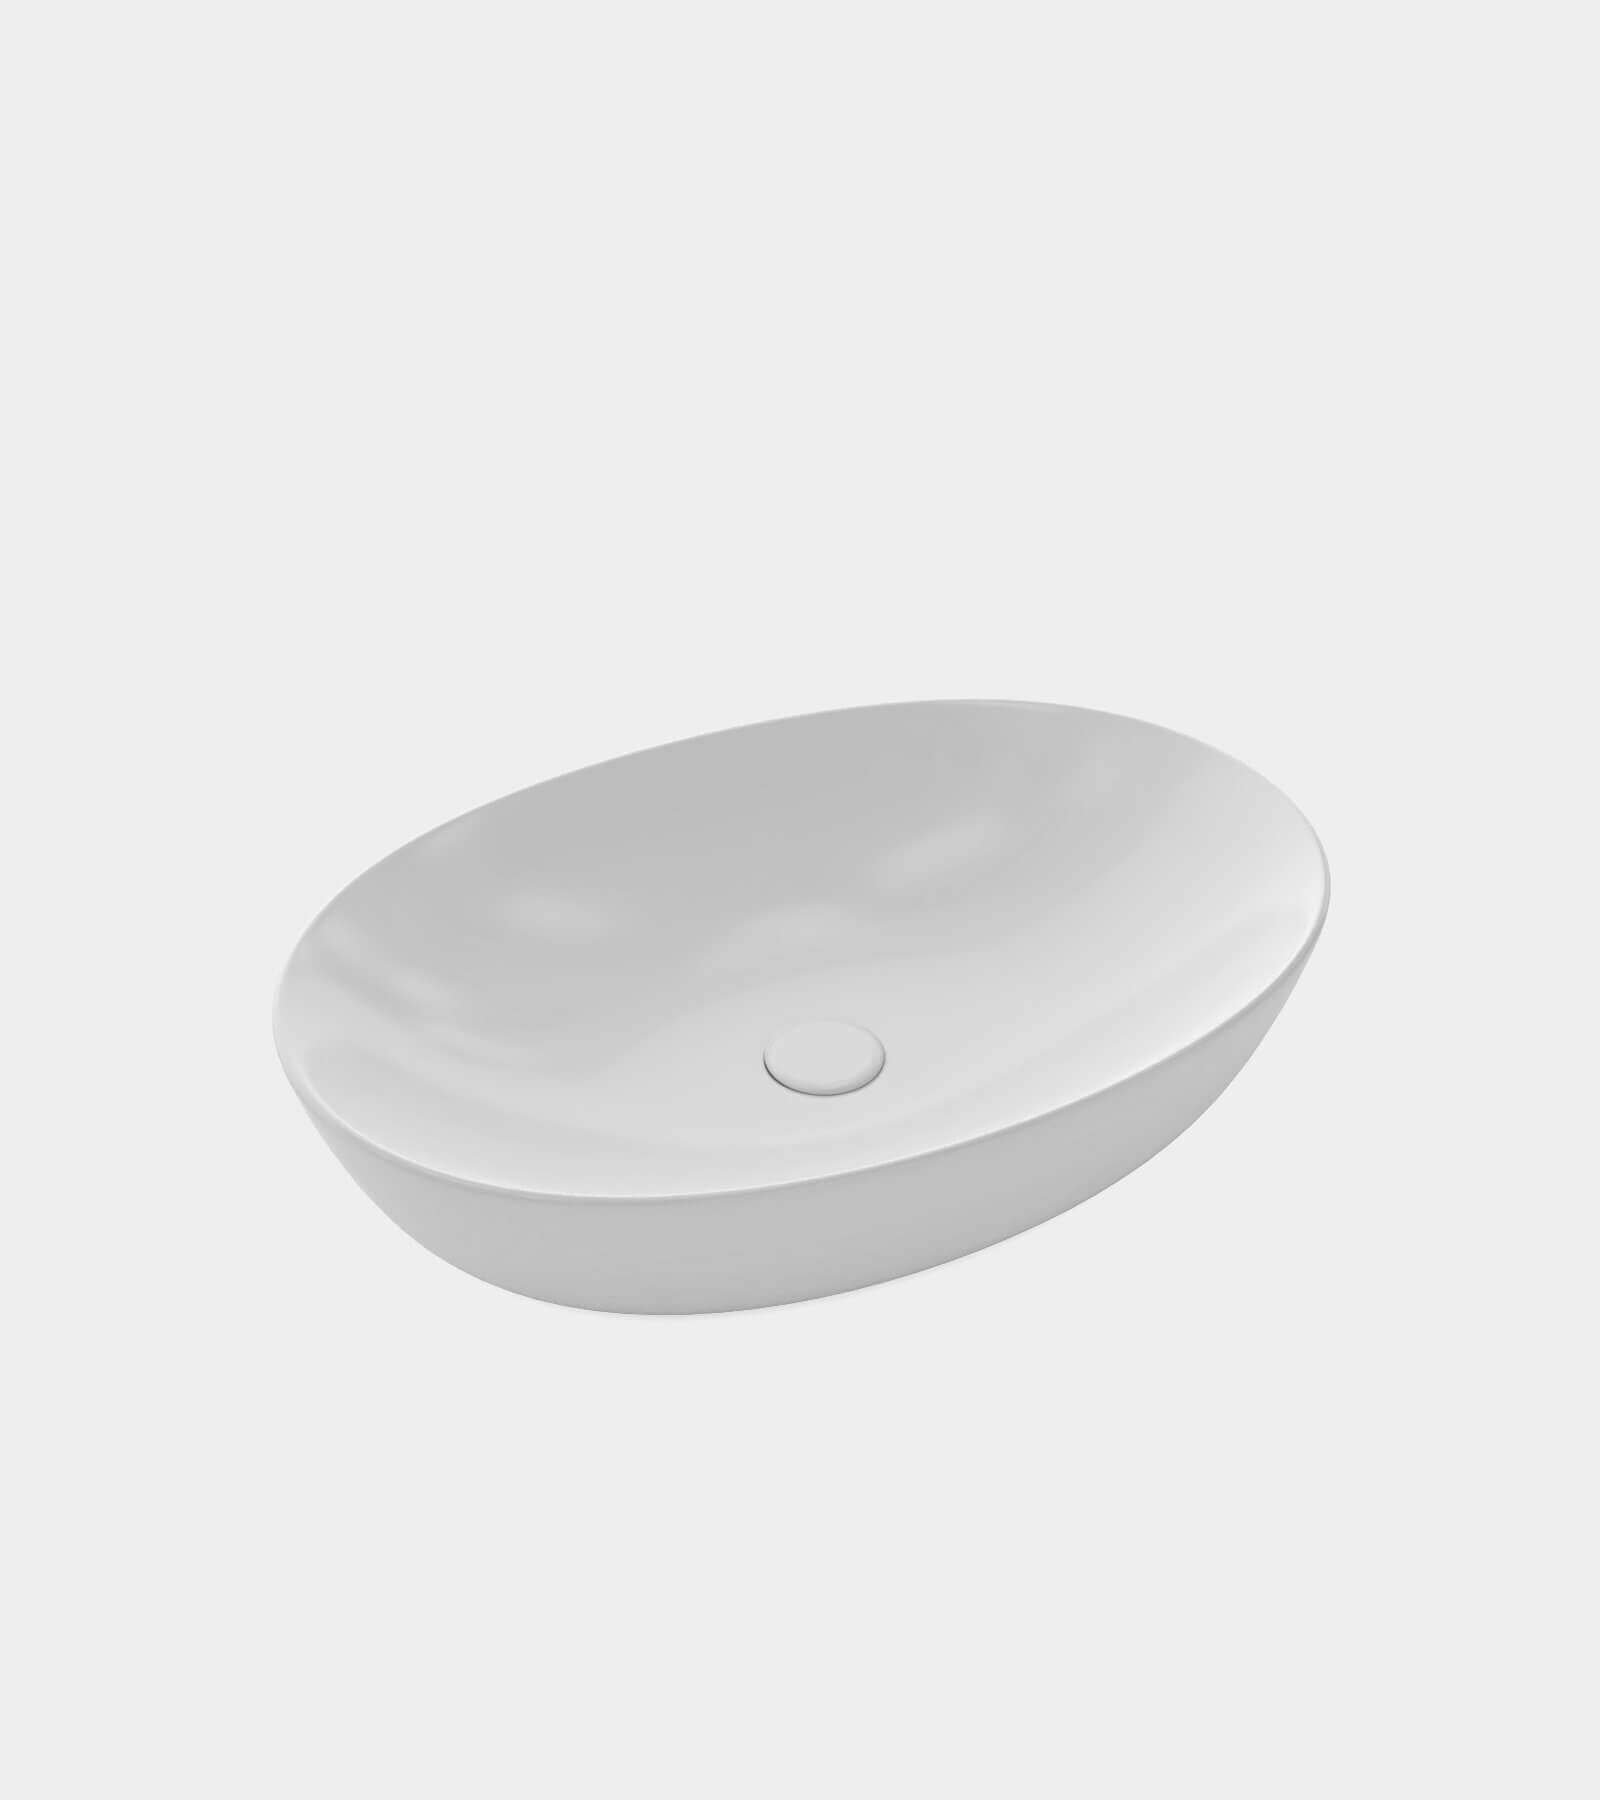 White wash basin with a round shape 3D Model